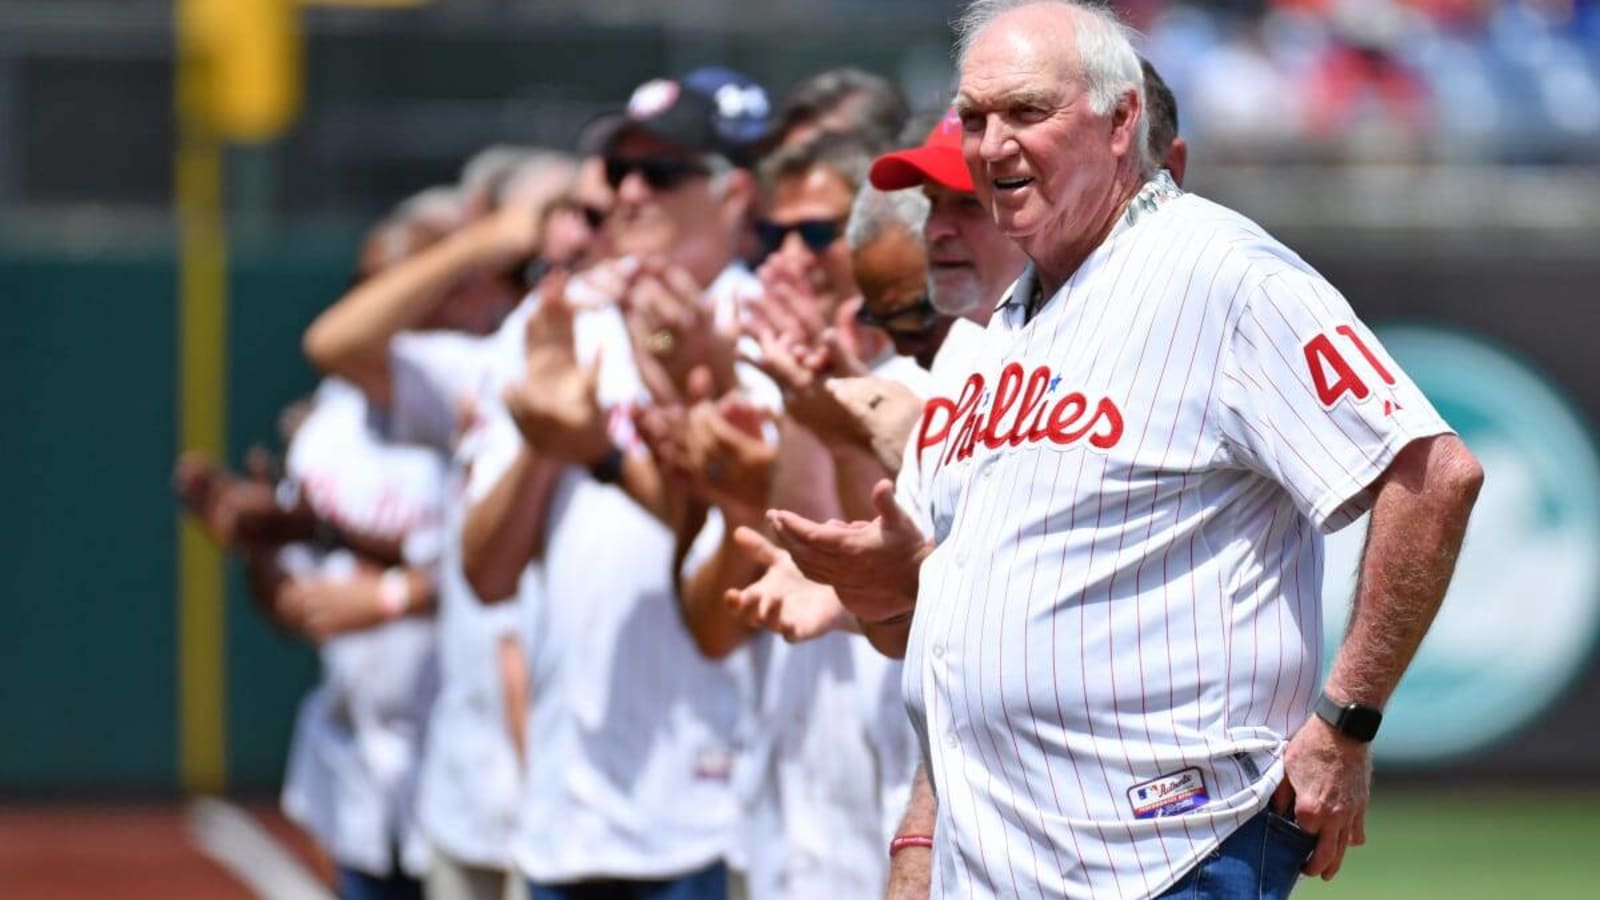 Former Phillies Manager Shares Message Thanking Supporters